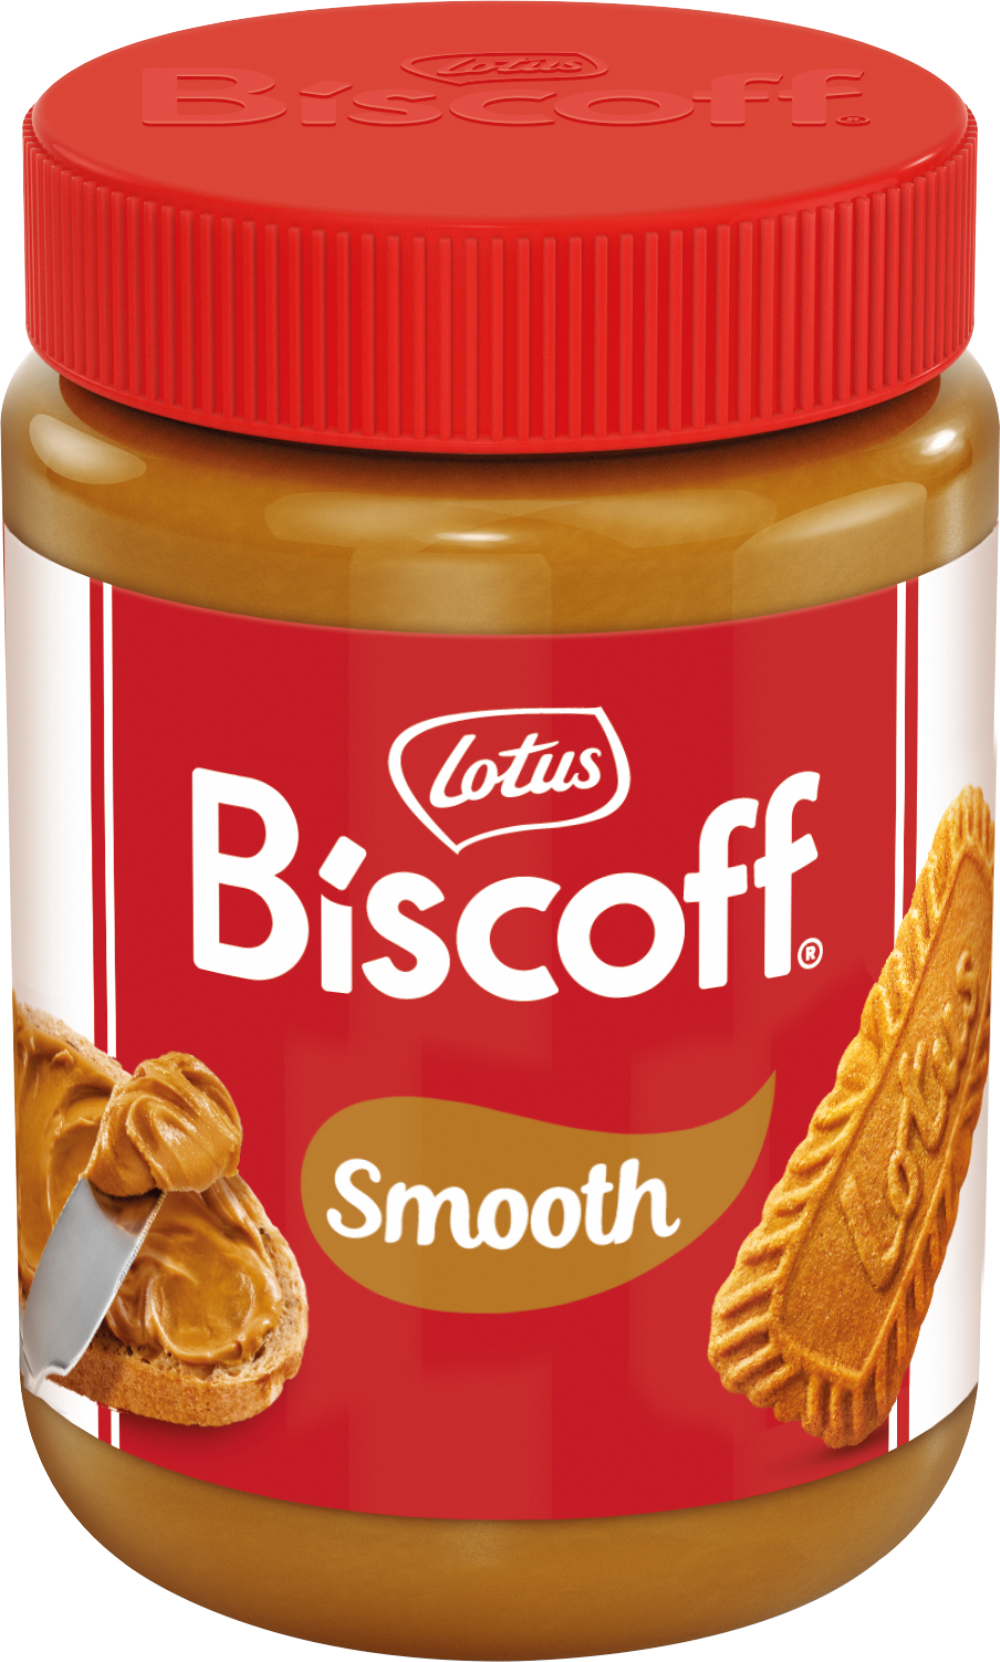 LOTUS Biscoff Smooth Biscuit Spread 400g